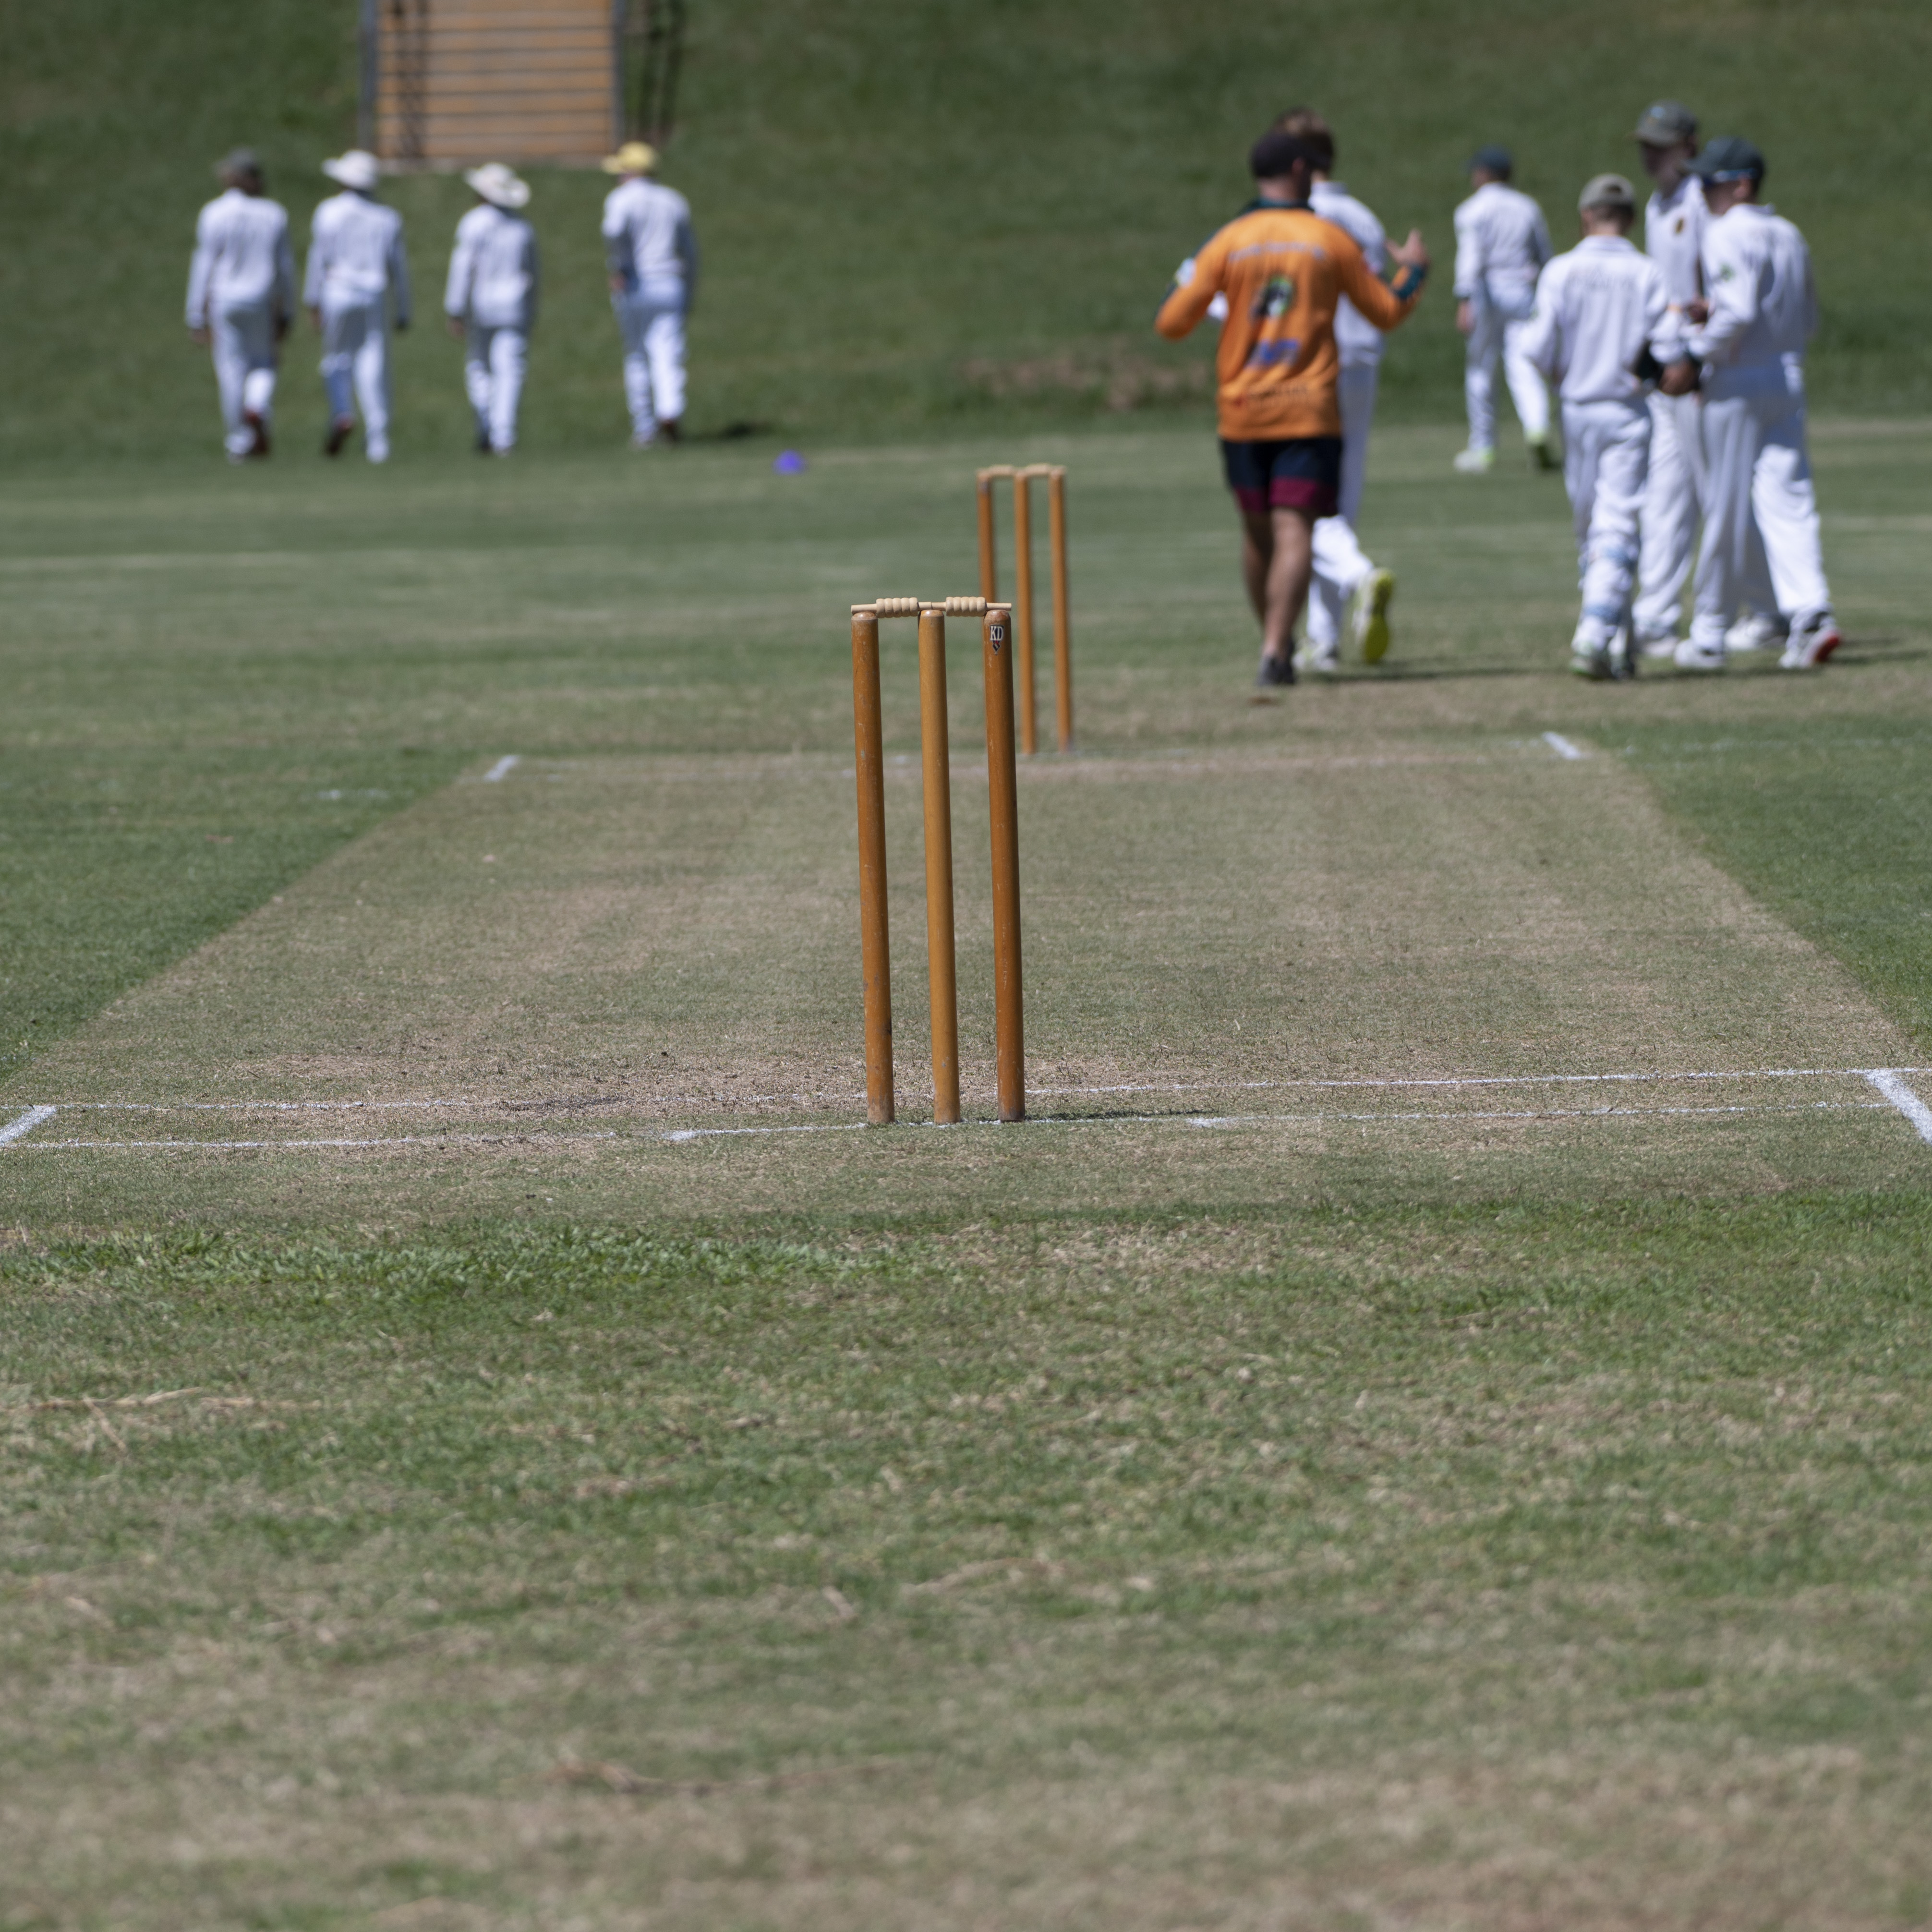 Cricket Pitch After Innings